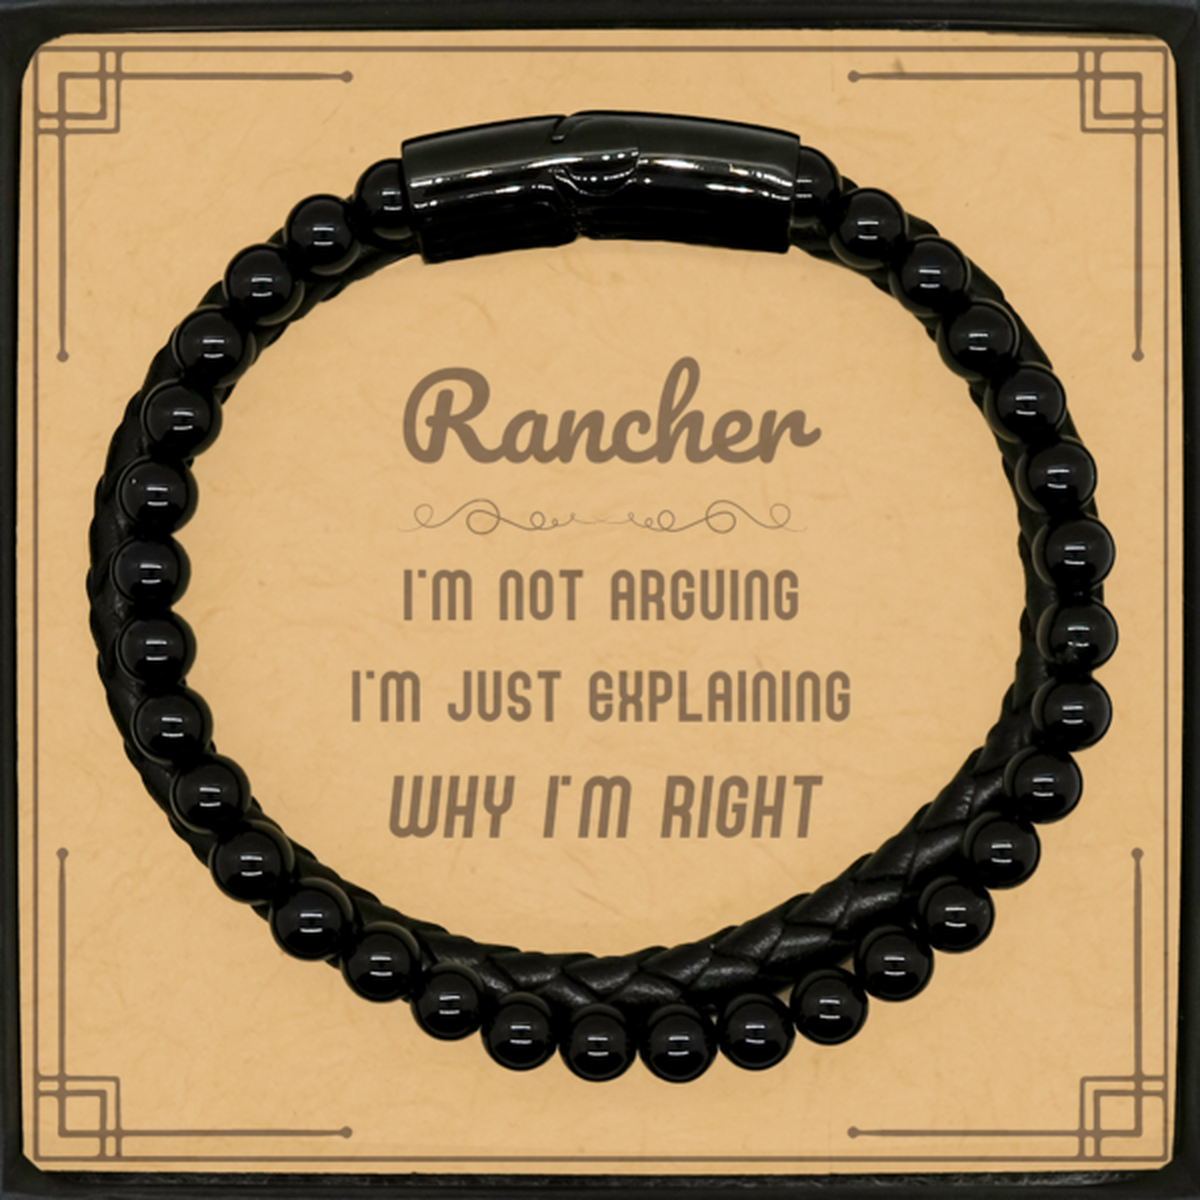 Rancher I'm not Arguing. I'm Just Explaining Why I'm RIGHT Stone Leather Bracelets, Funny Saying Quote Rancher Gifts For Rancher Message Card Graduation Birthday Christmas Gifts for Men Women Coworker